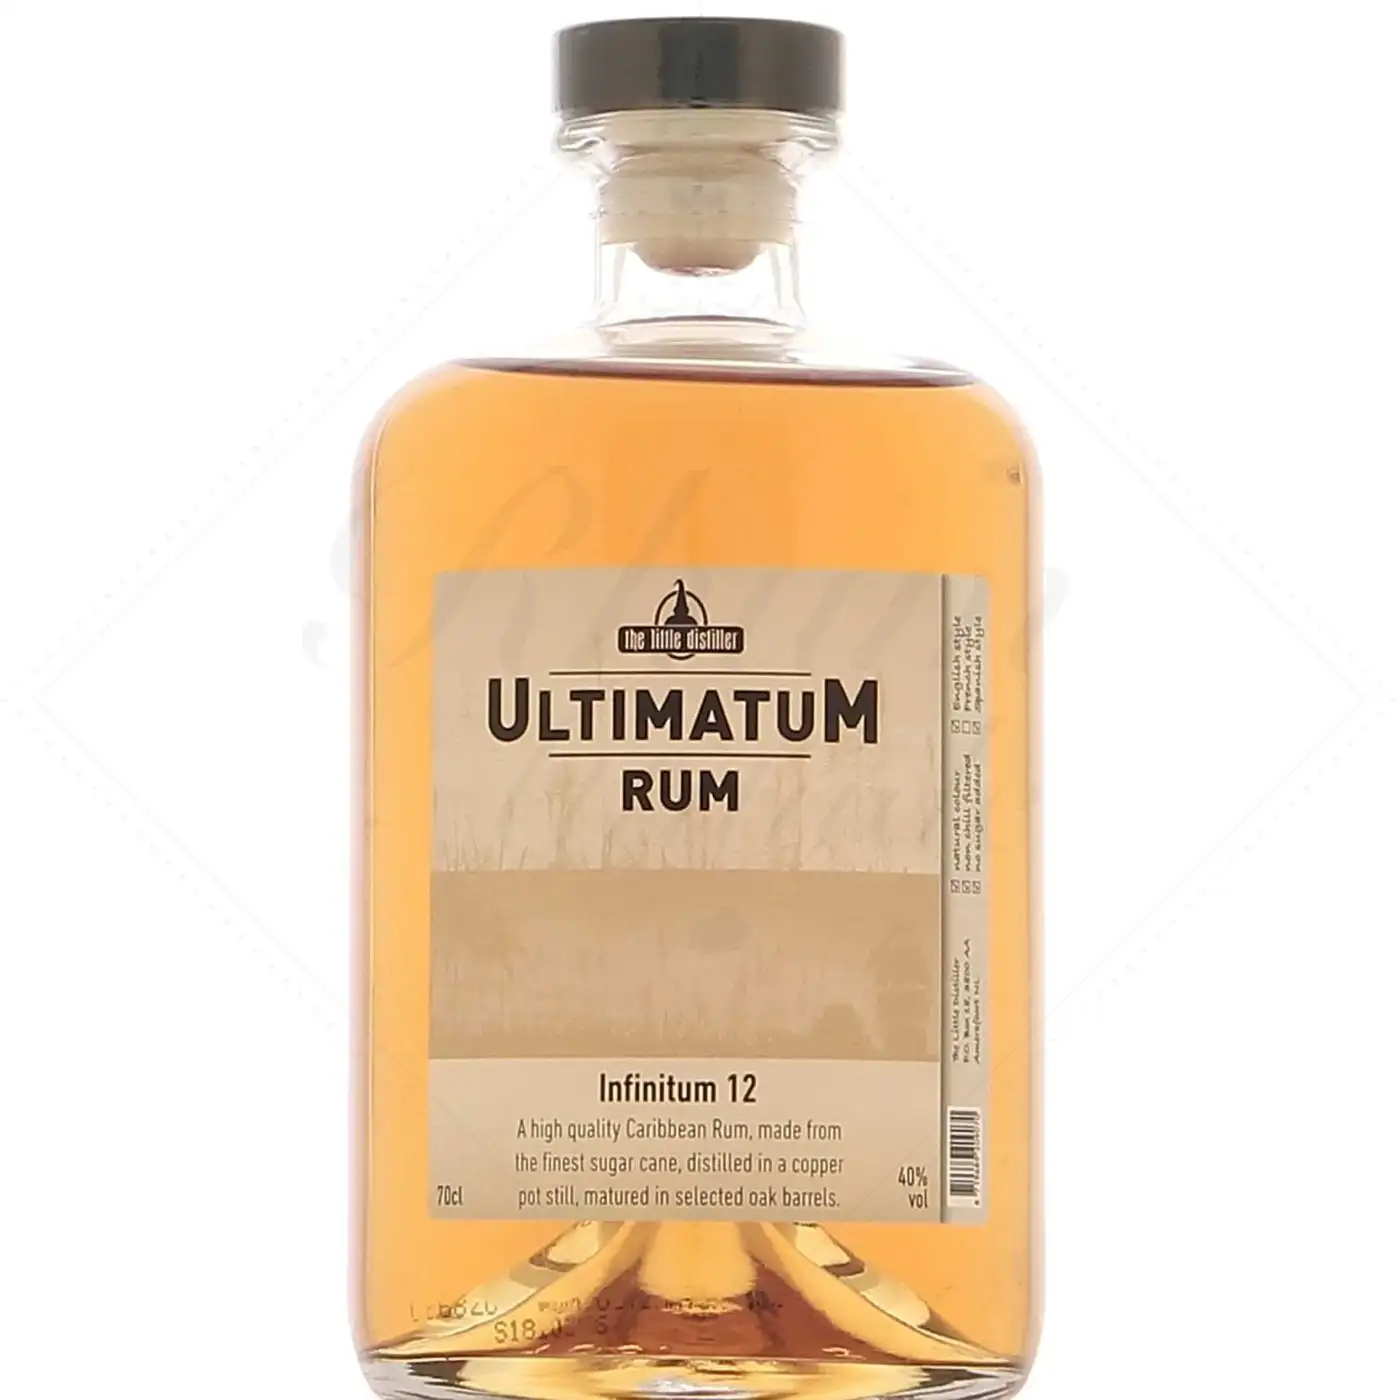 Image of the front of the bottle of the rum Ultimatum Rum Infinitum 12